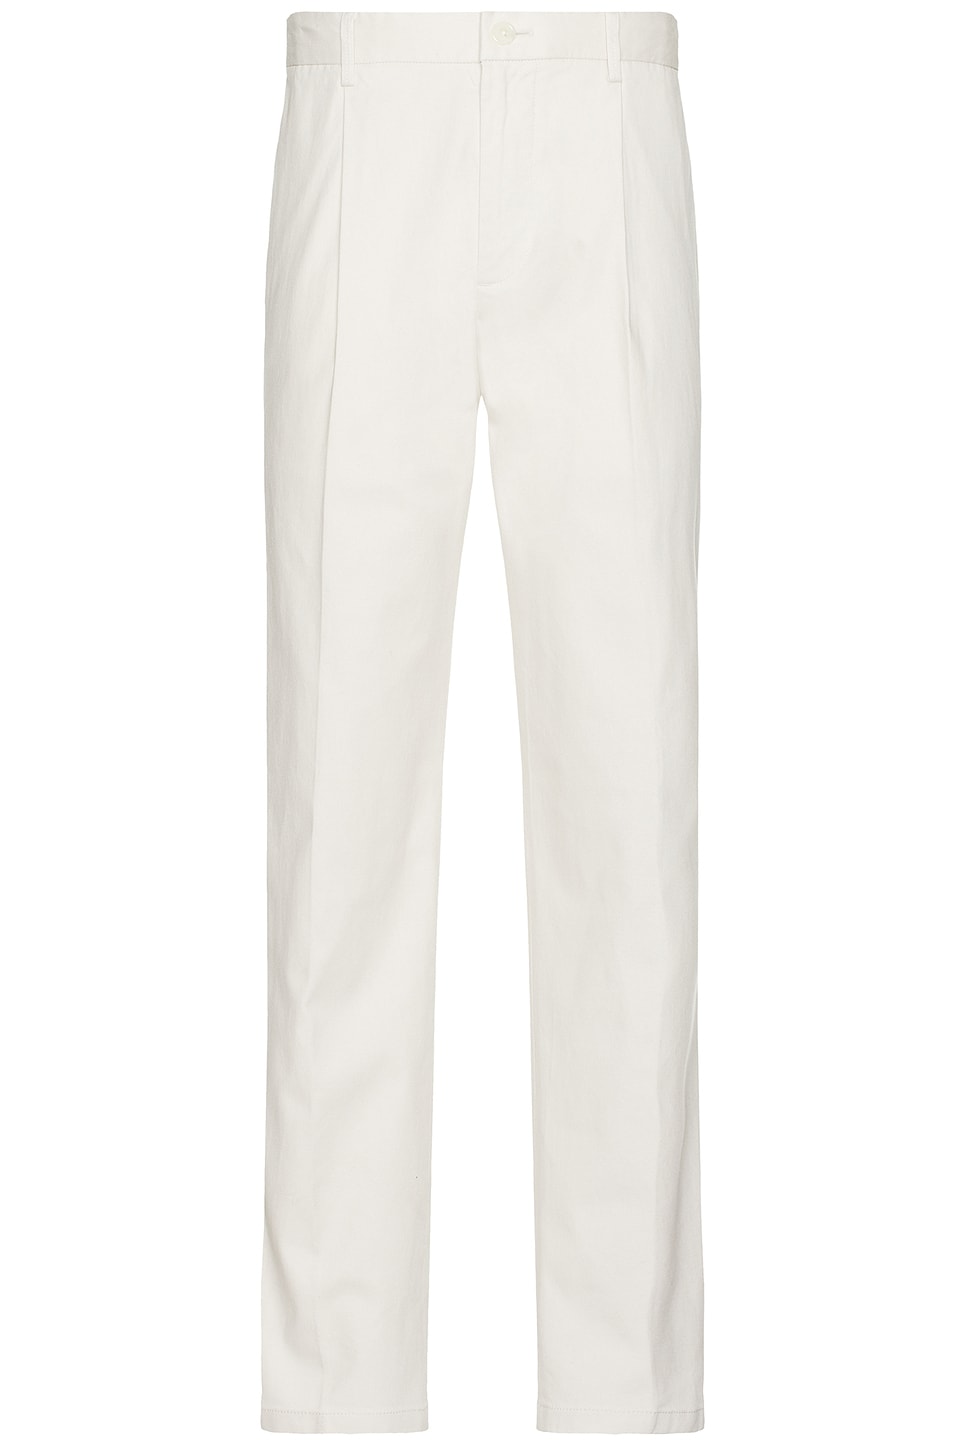 Image 1 of Club Monaco Pleated Trouser in Off White